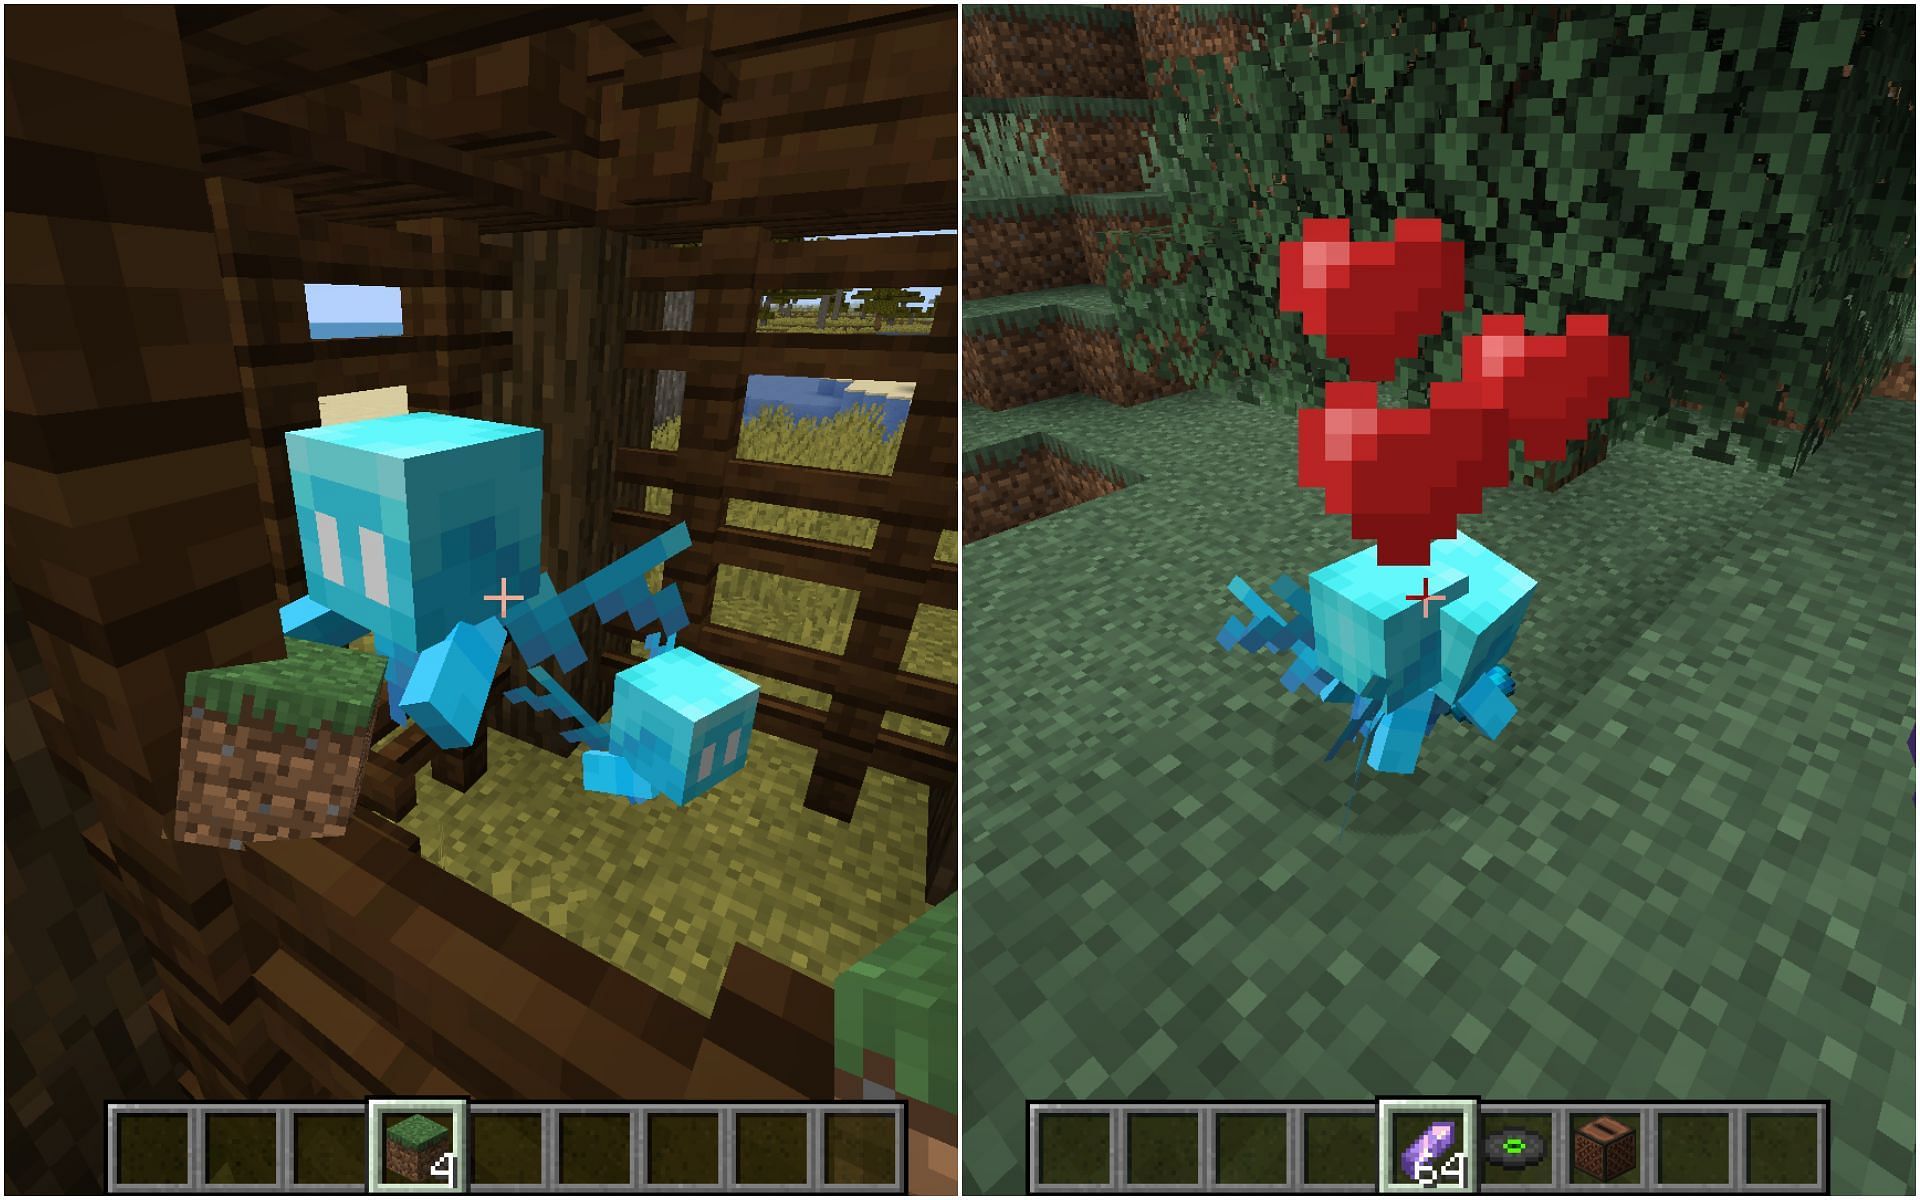 Allays can be found in a structure and can be duplicated with an item (Image via Mojang/Minecraft 1.19.1 update)